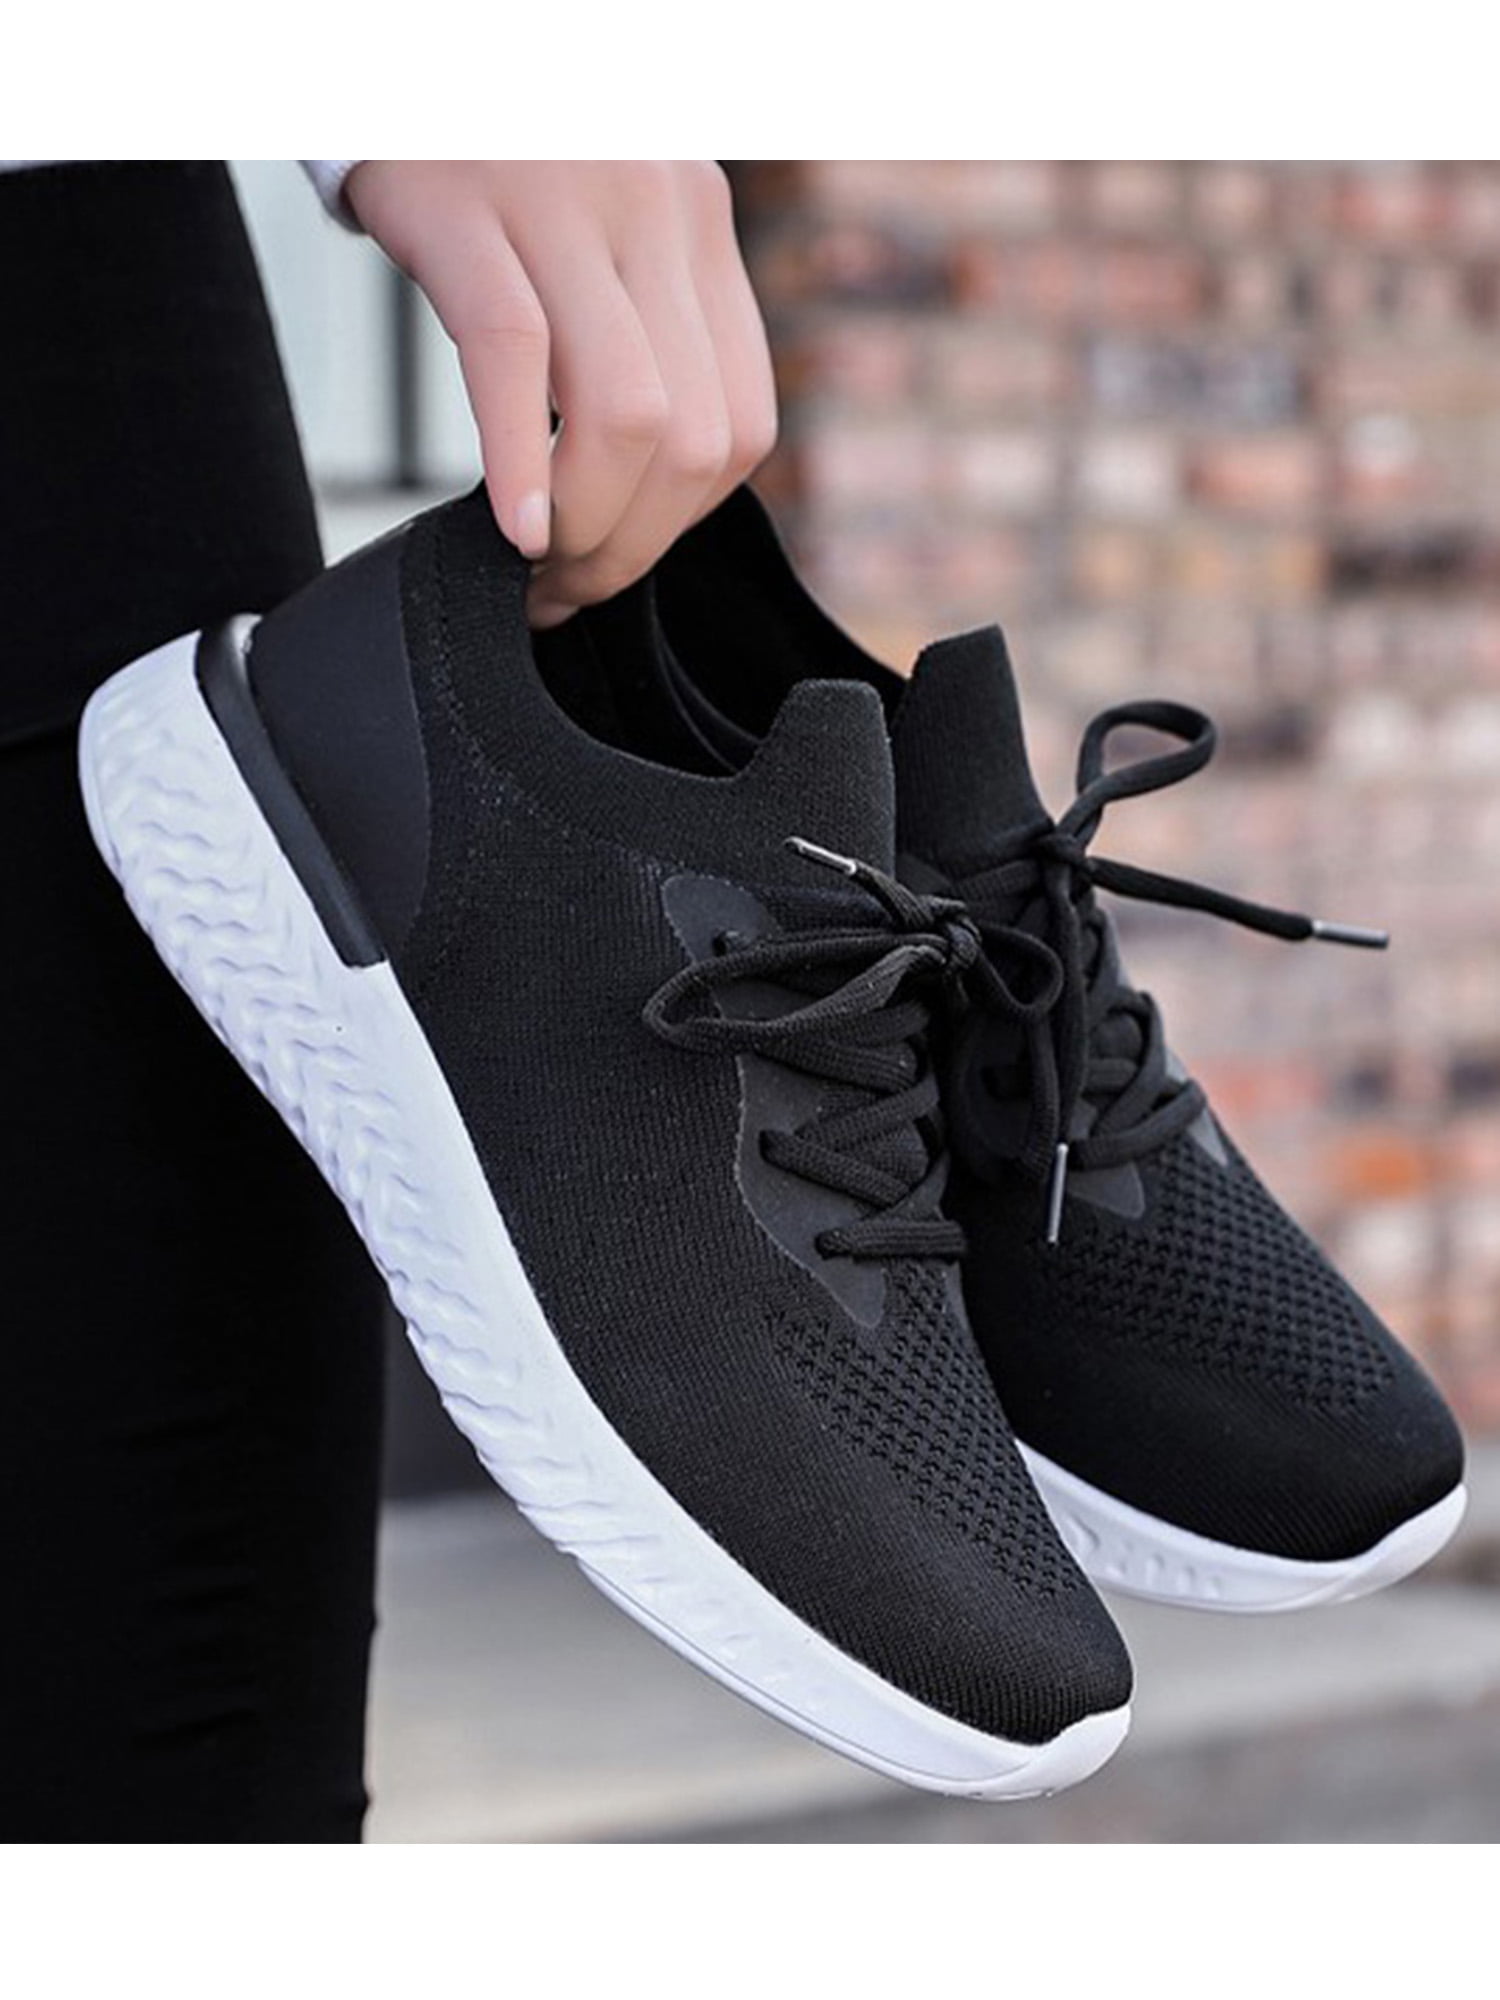 Details about   Shoes Sneakers Running Breathable Men Women Mesh Casual S Tennis Sports Athletic 